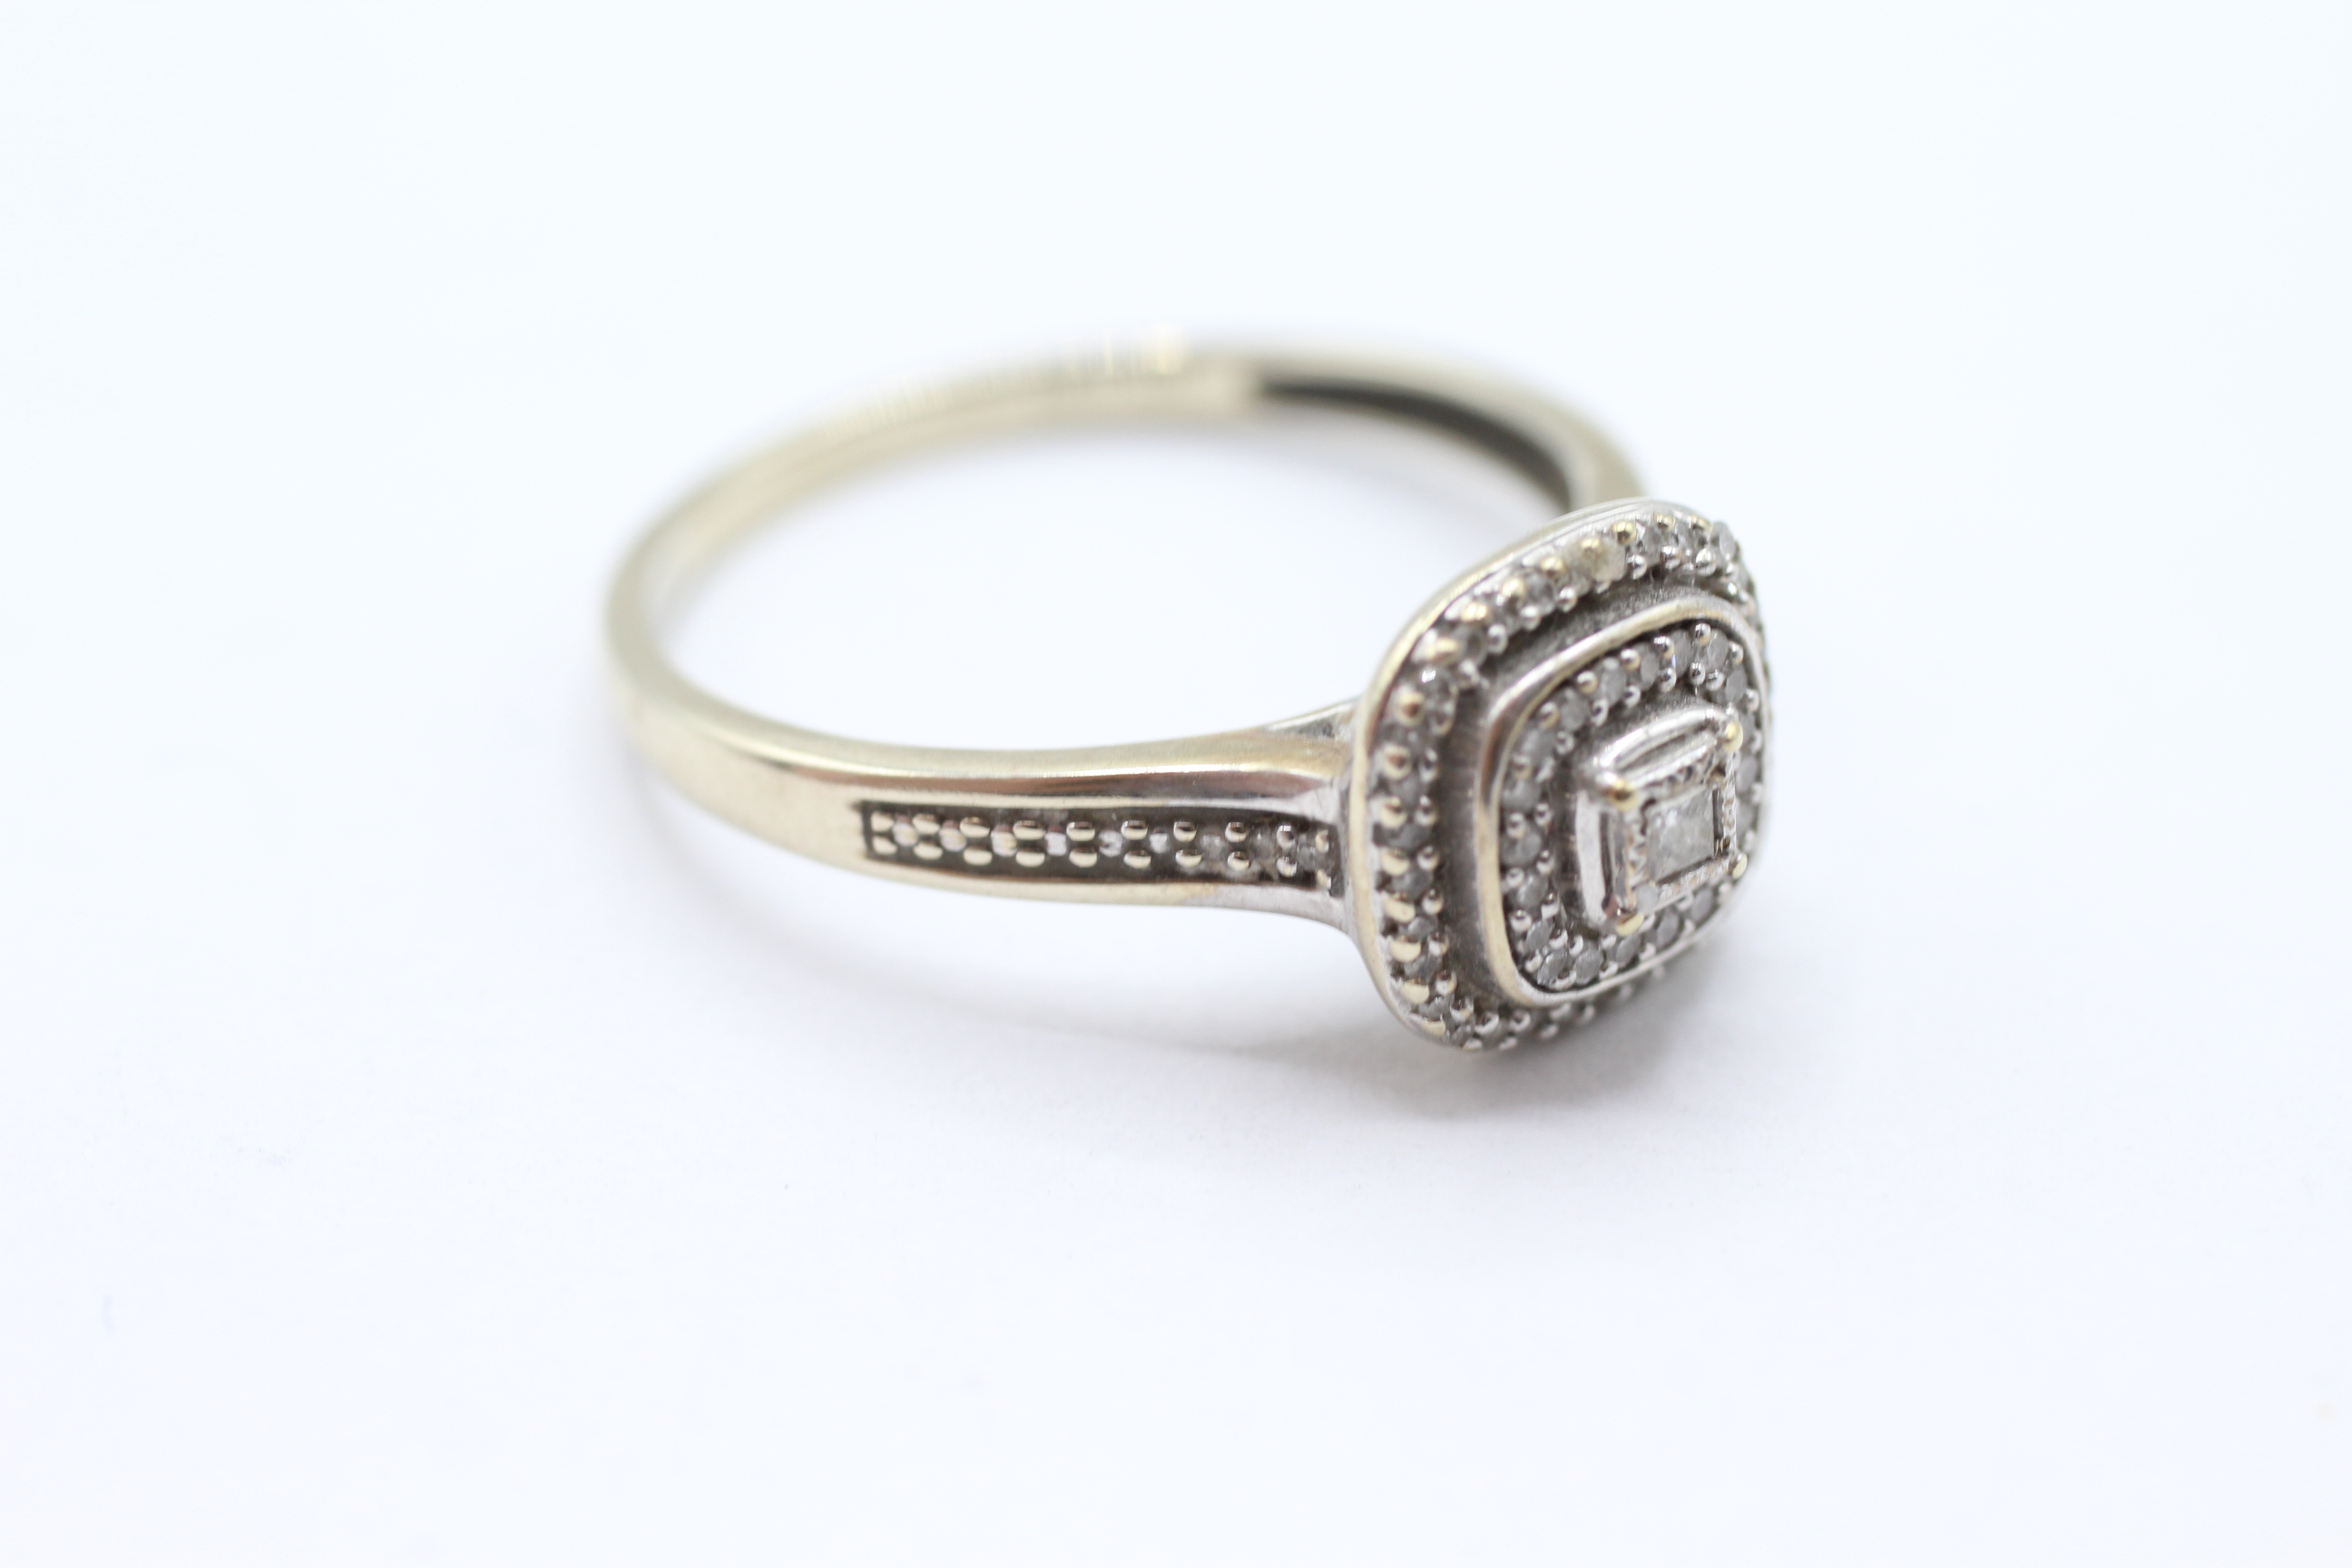 9ct gold diamond halo ring Size T - 3.1 g - Image 2 of 5